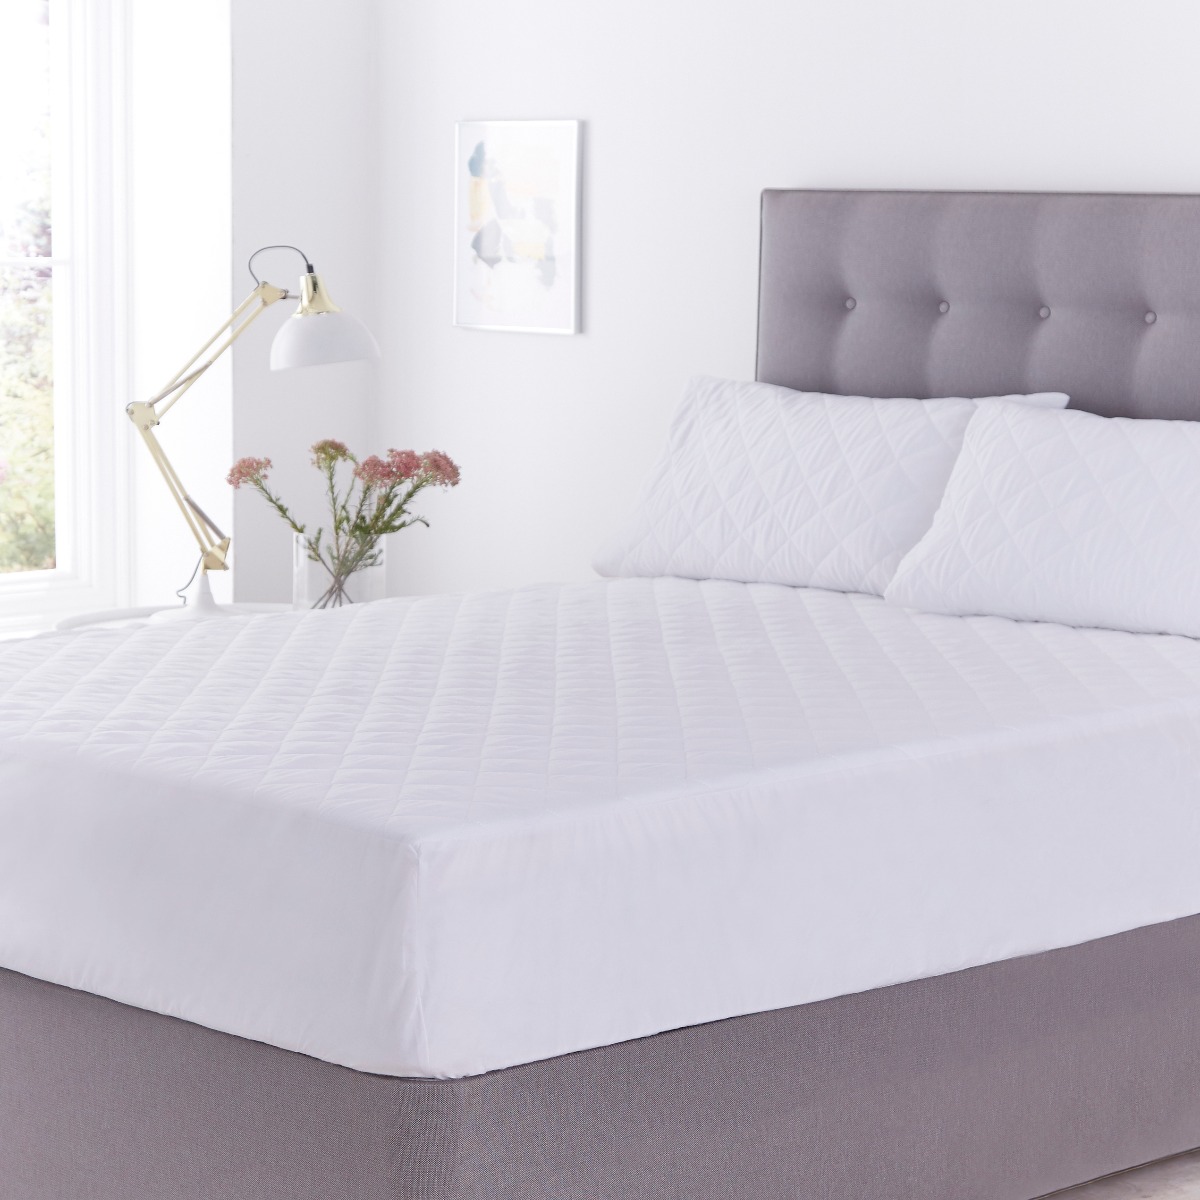 Super Soft Quilted Luxury Bed Mattress Protector Deep Fitted Sheet Cover-Single